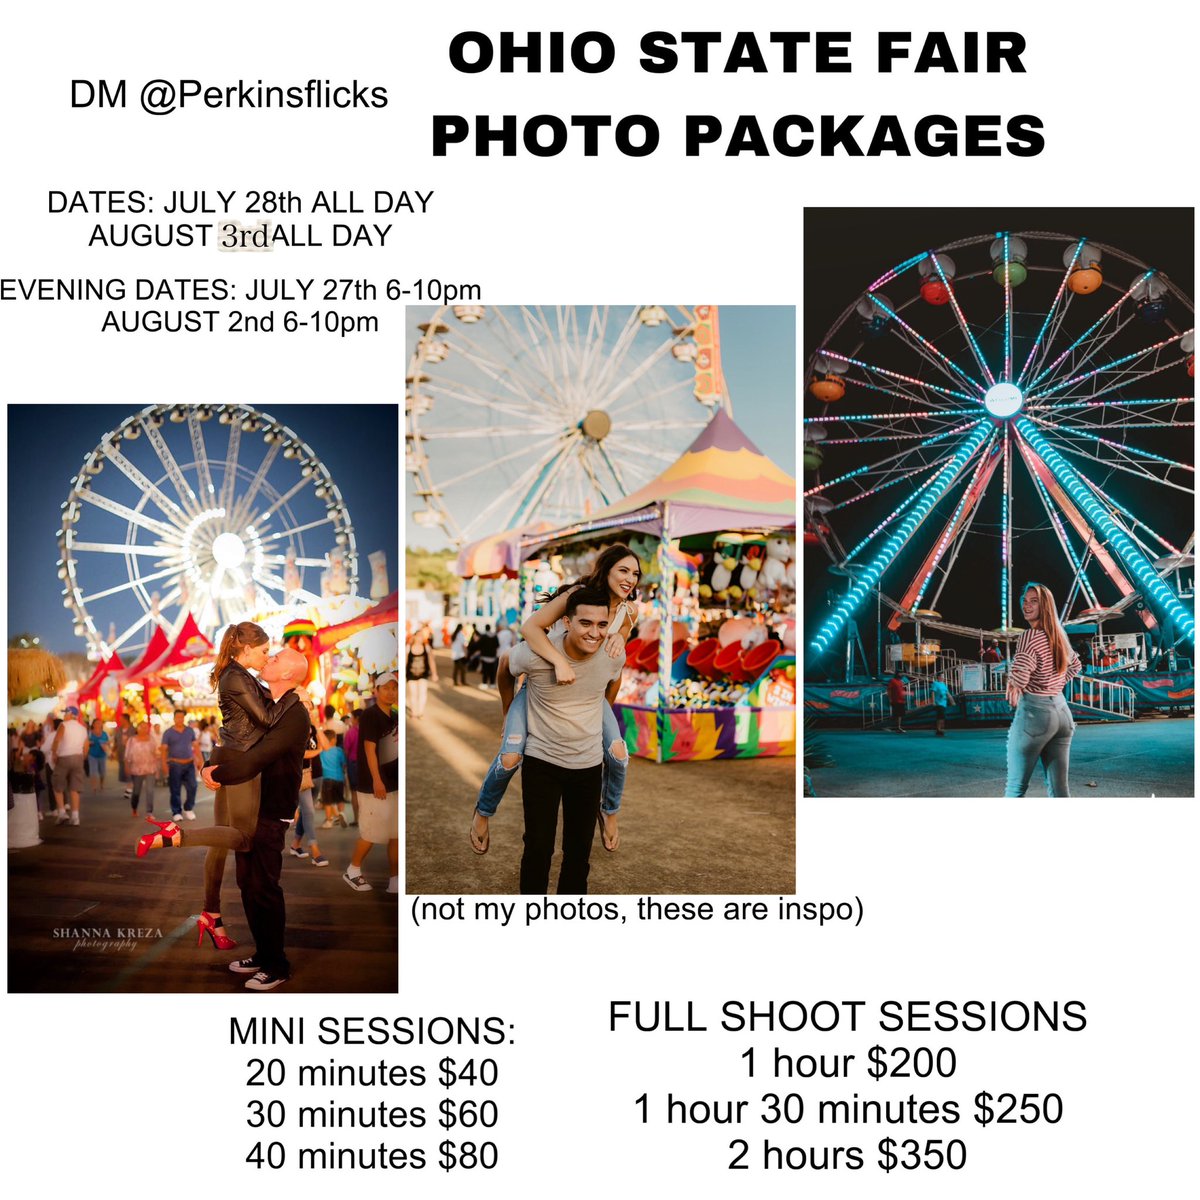 just going to leave this here… DM @Perkinsflicks on instagram for more details!!
-
#photography #ohiostatefairphotos #ohiostatefair #ohiophotographer